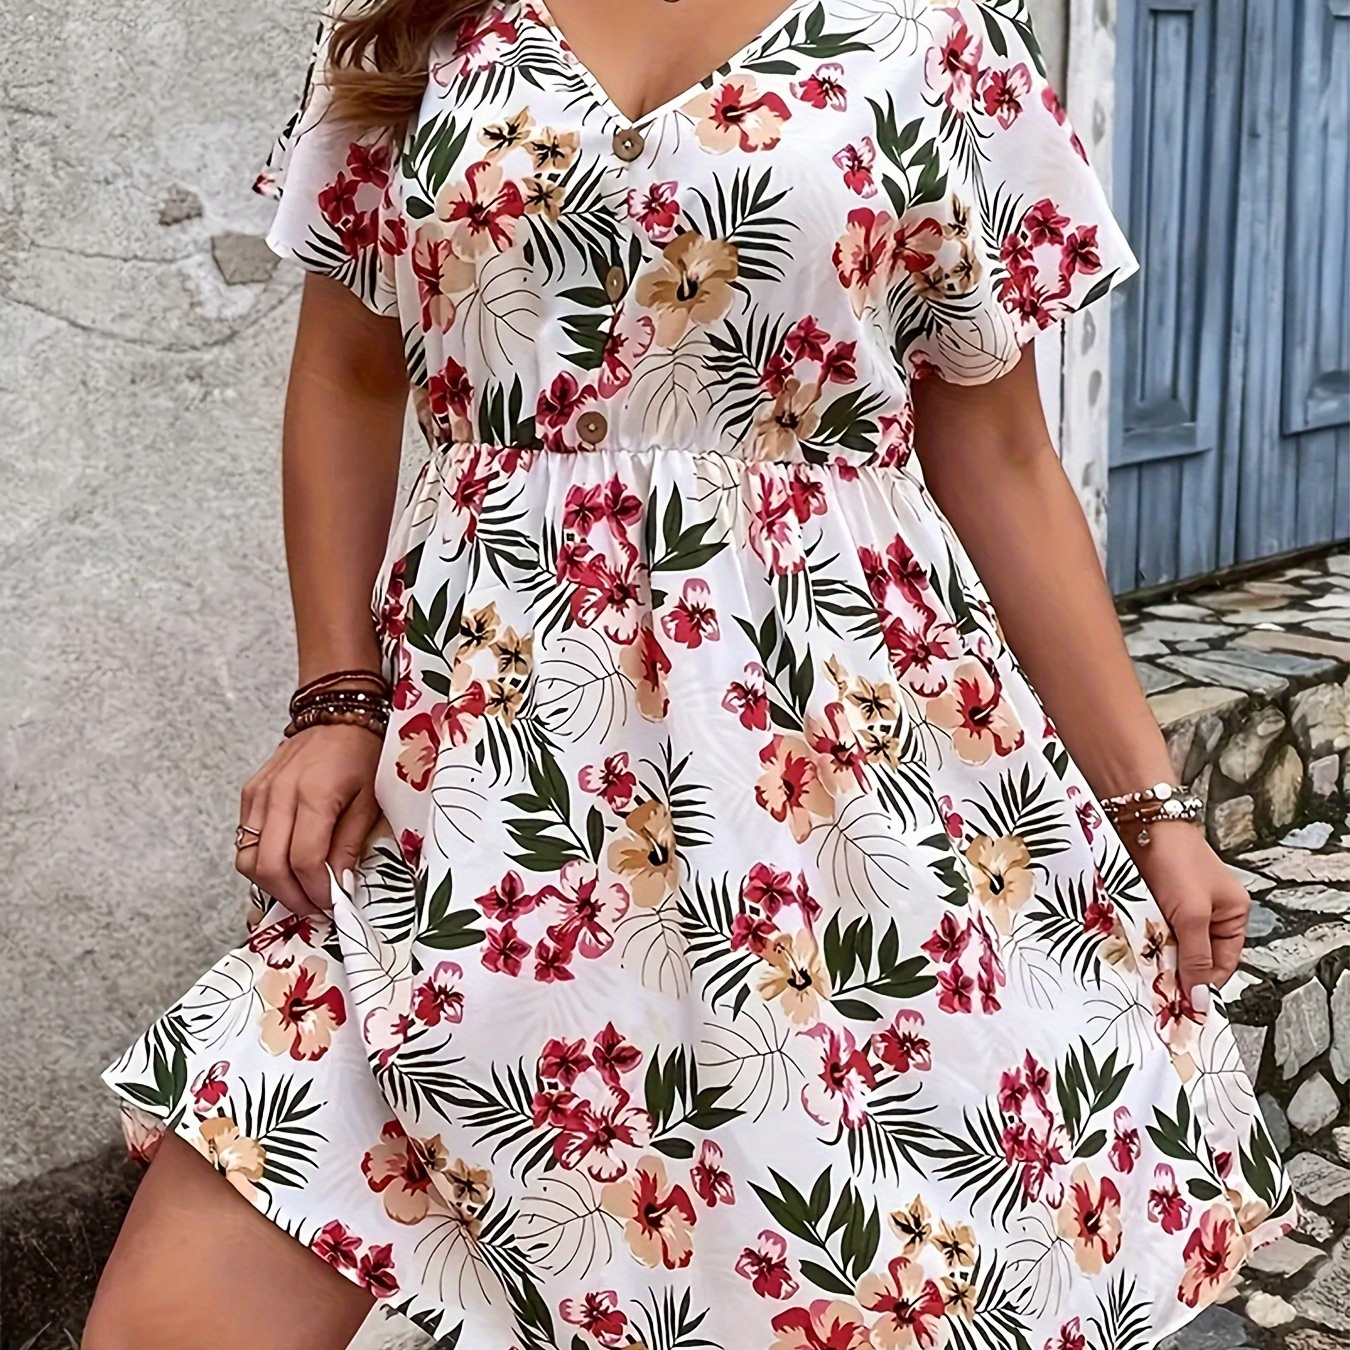 

Plus Size Floral Print Cinched Waist Dress, Vacation Style Button Front Batwing Sleeve V Neck Dress For Spring & Summer, Women's Plus Size Clothing